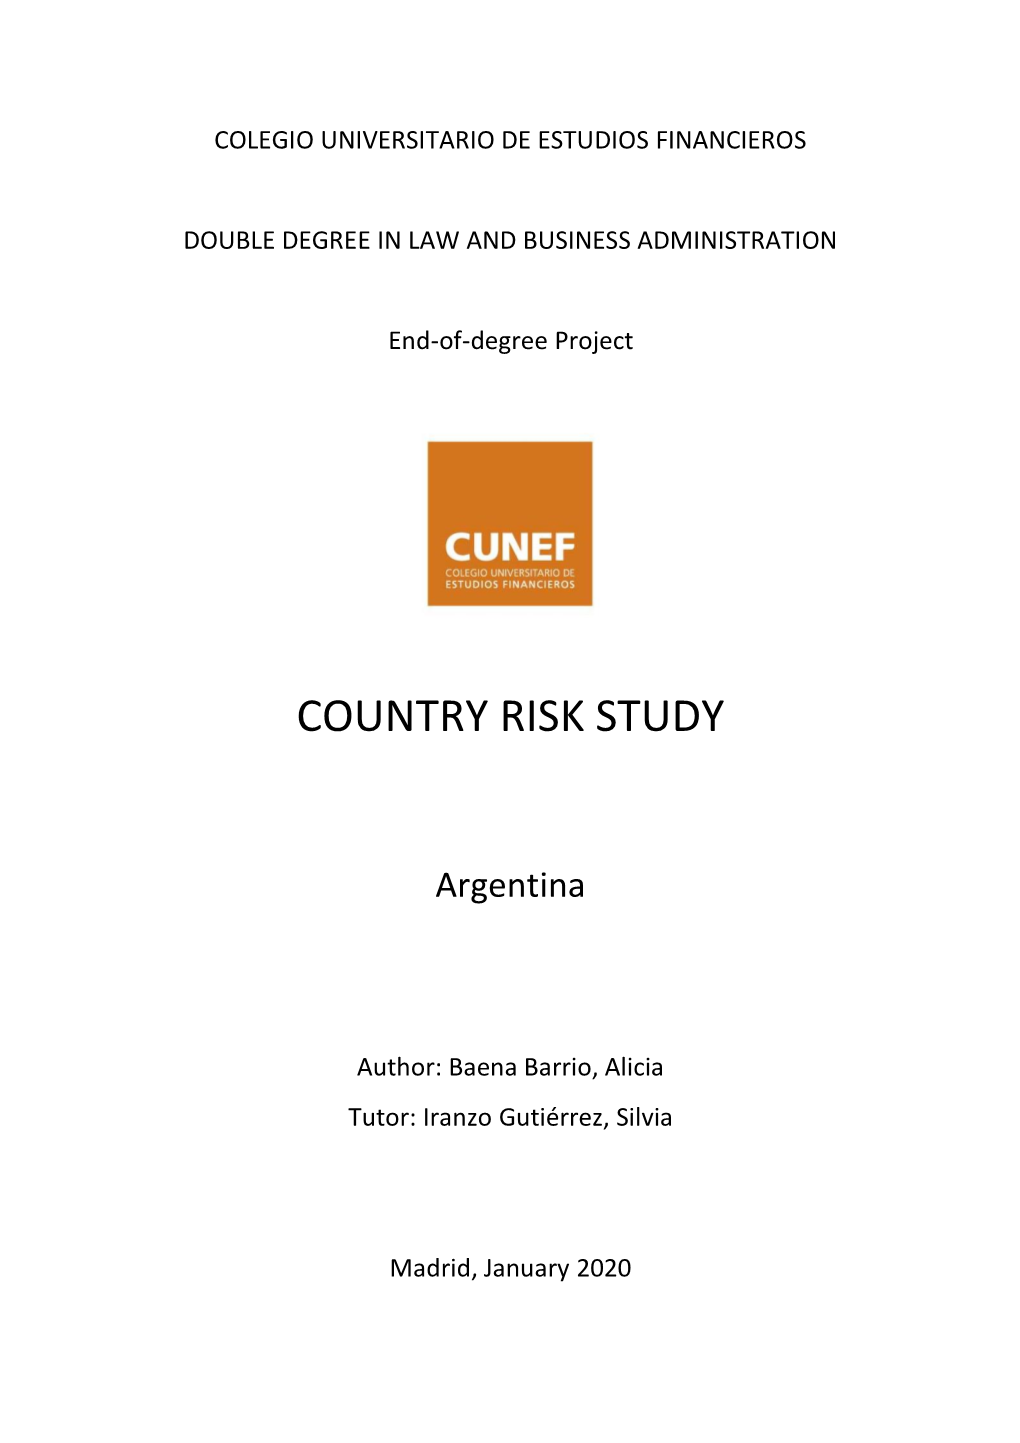 Country Risk Study